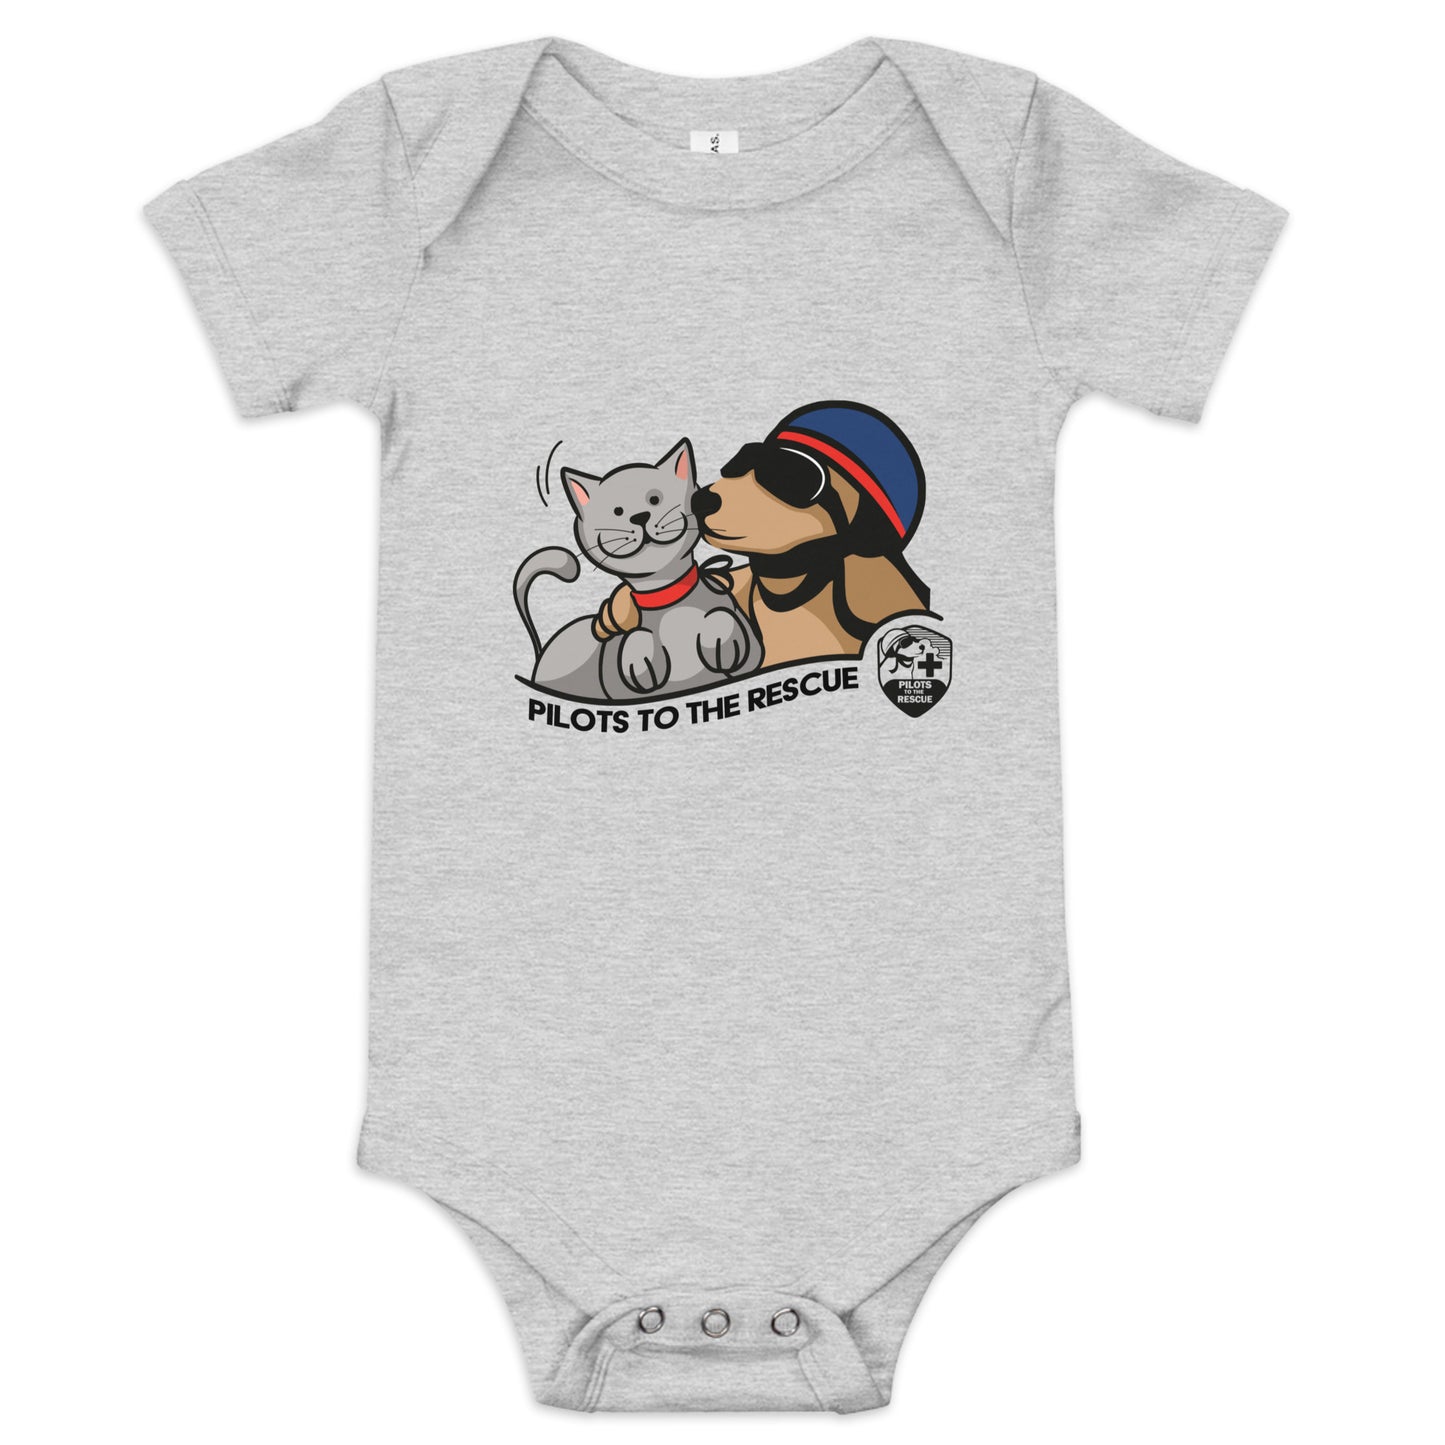 Cat and Dog- Baby short sleeve one piece